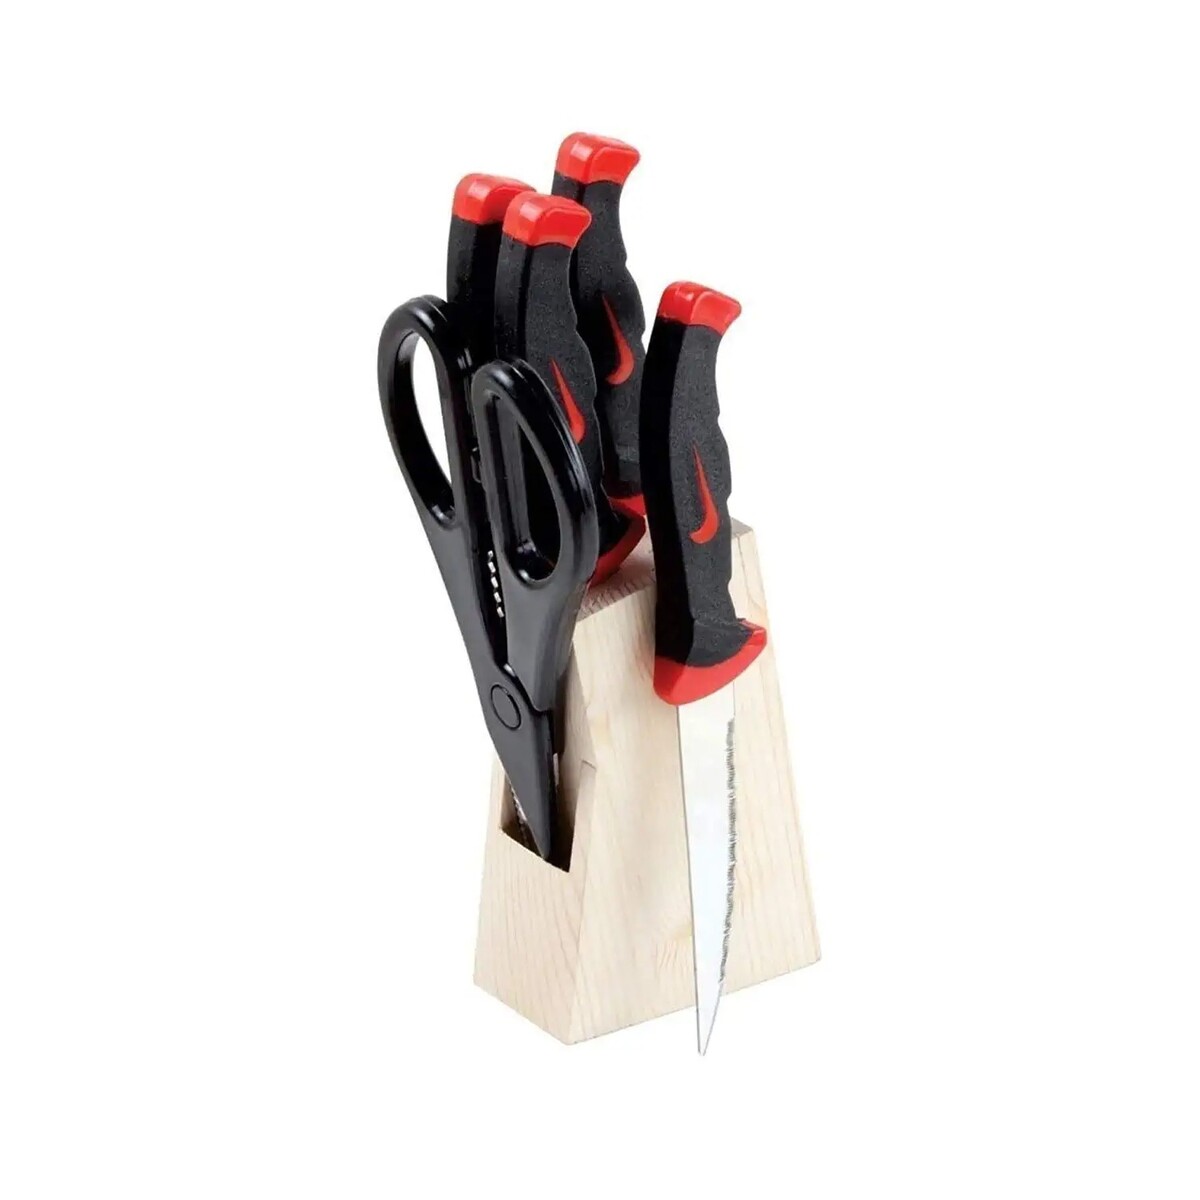 Chefline Knife&Scissor With Wooden stand 6Pc